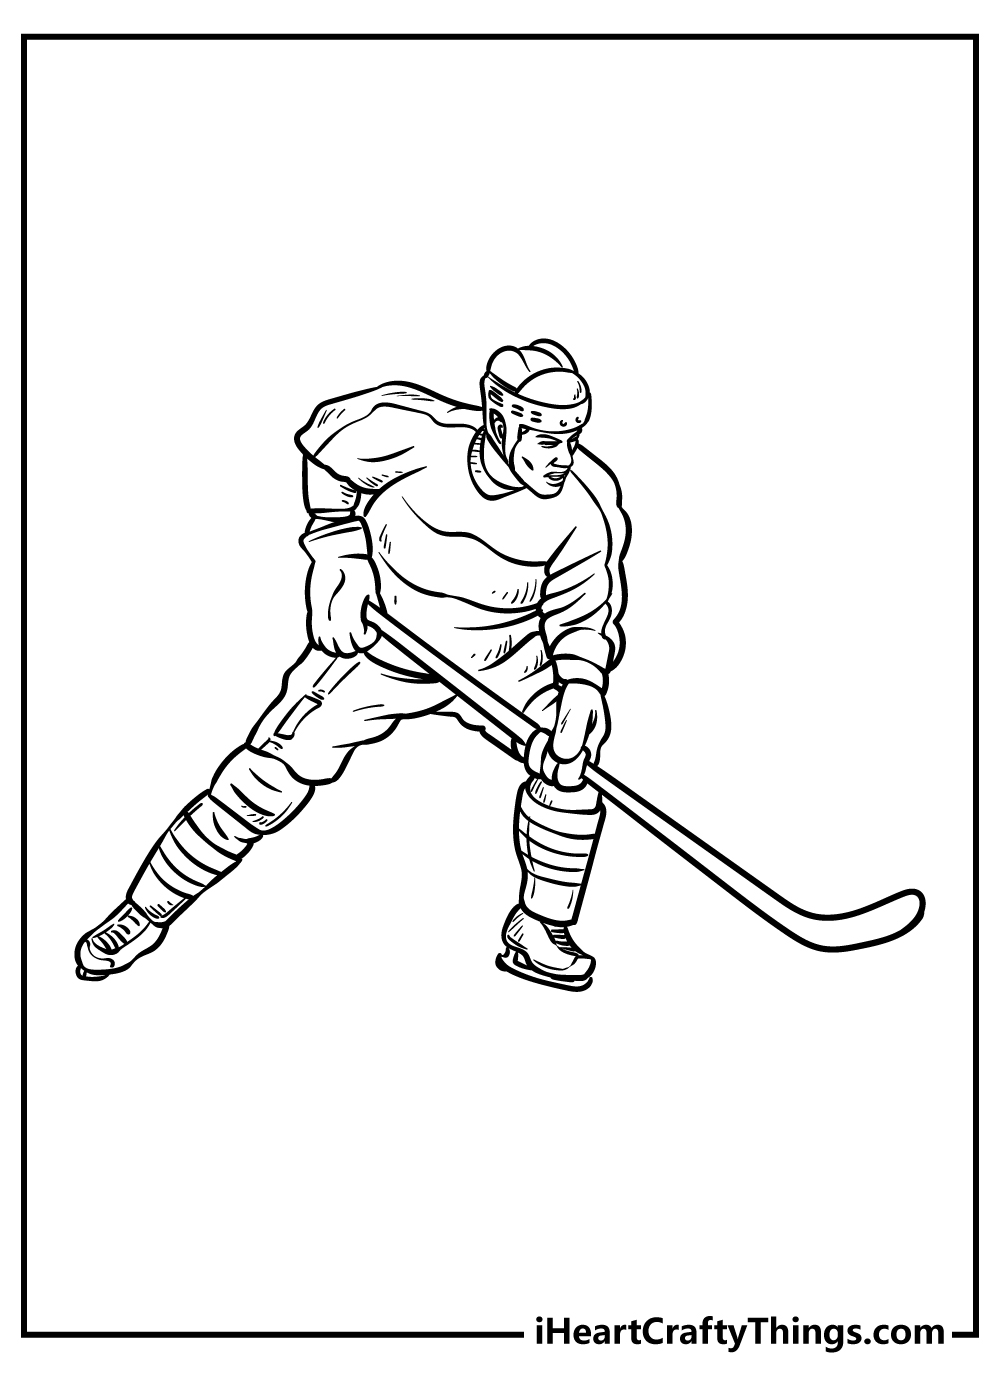 Hockey Coloring Pages for preschoolers free printable